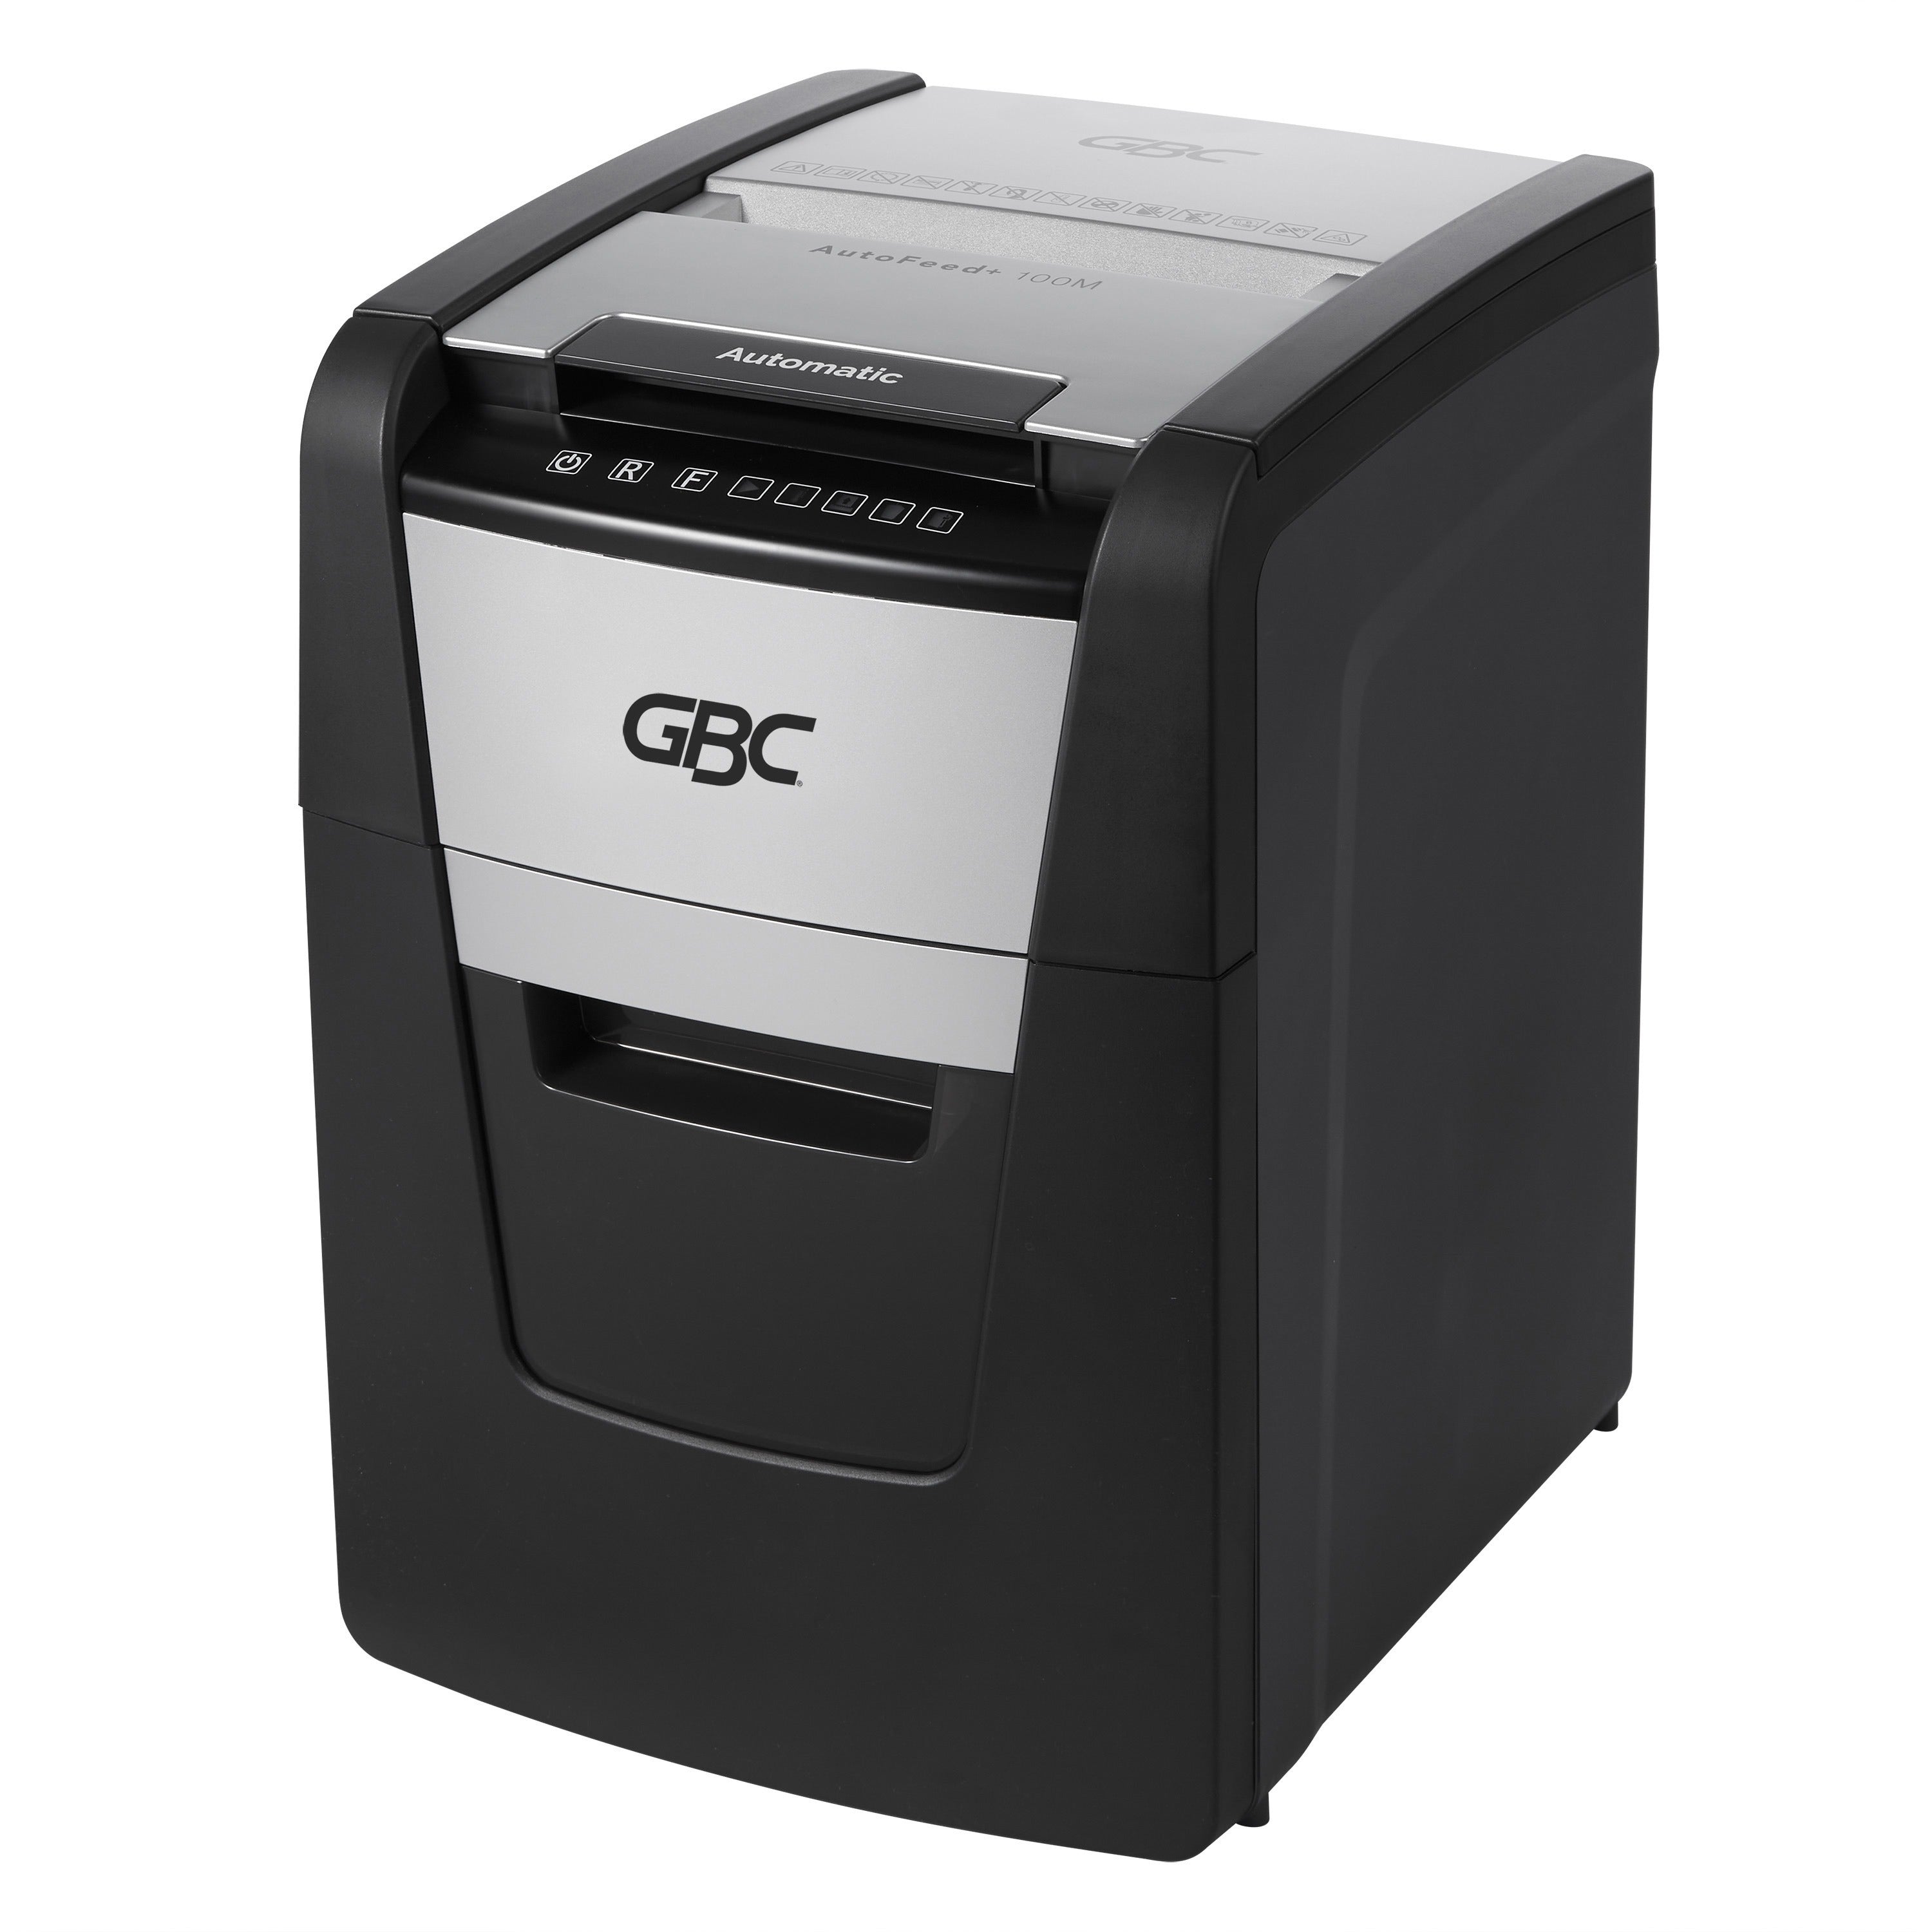 gbc-autofeed+-home-office-shredder-100m-micro-cut-100-sheets-continuous-shredder-micro-cut-6-per-pass-for-shredding-credit-card-paper-clip-staples-paper-p-5-20-minute-run-time-9-gal-wastebin-capacity-black_gbcwsm1757603 - 3